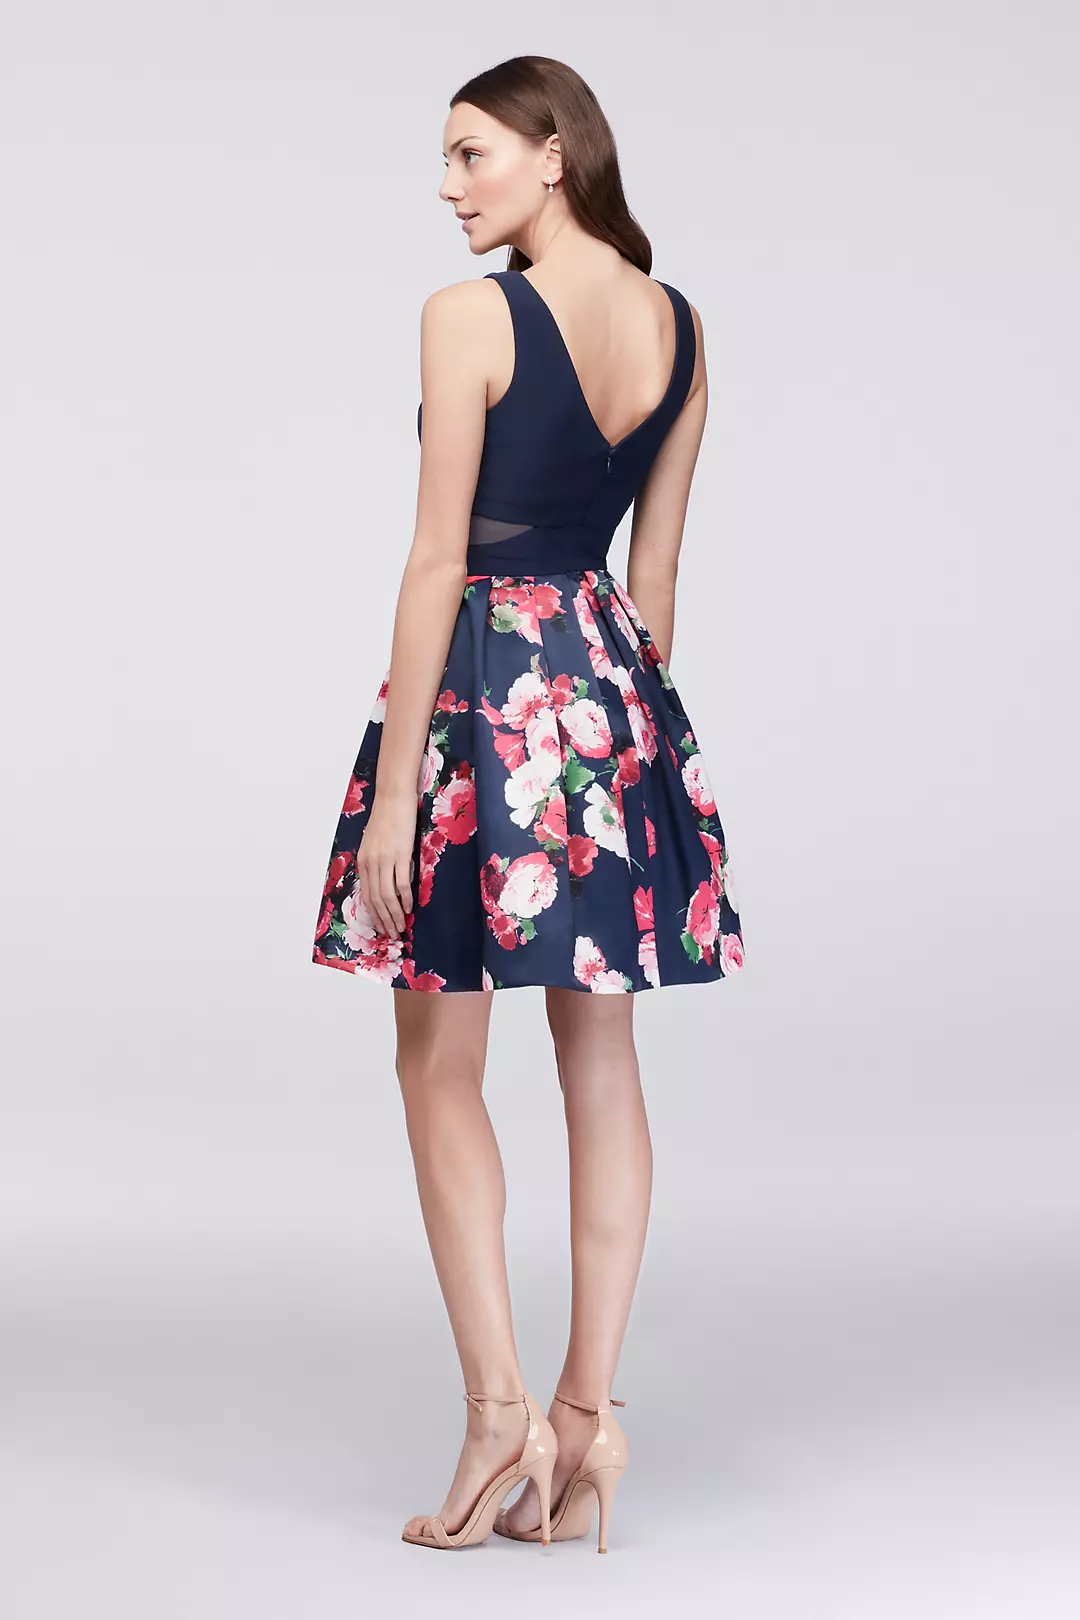 Floral Taffeta Cocktail Dress with Side Cutouts Image 2